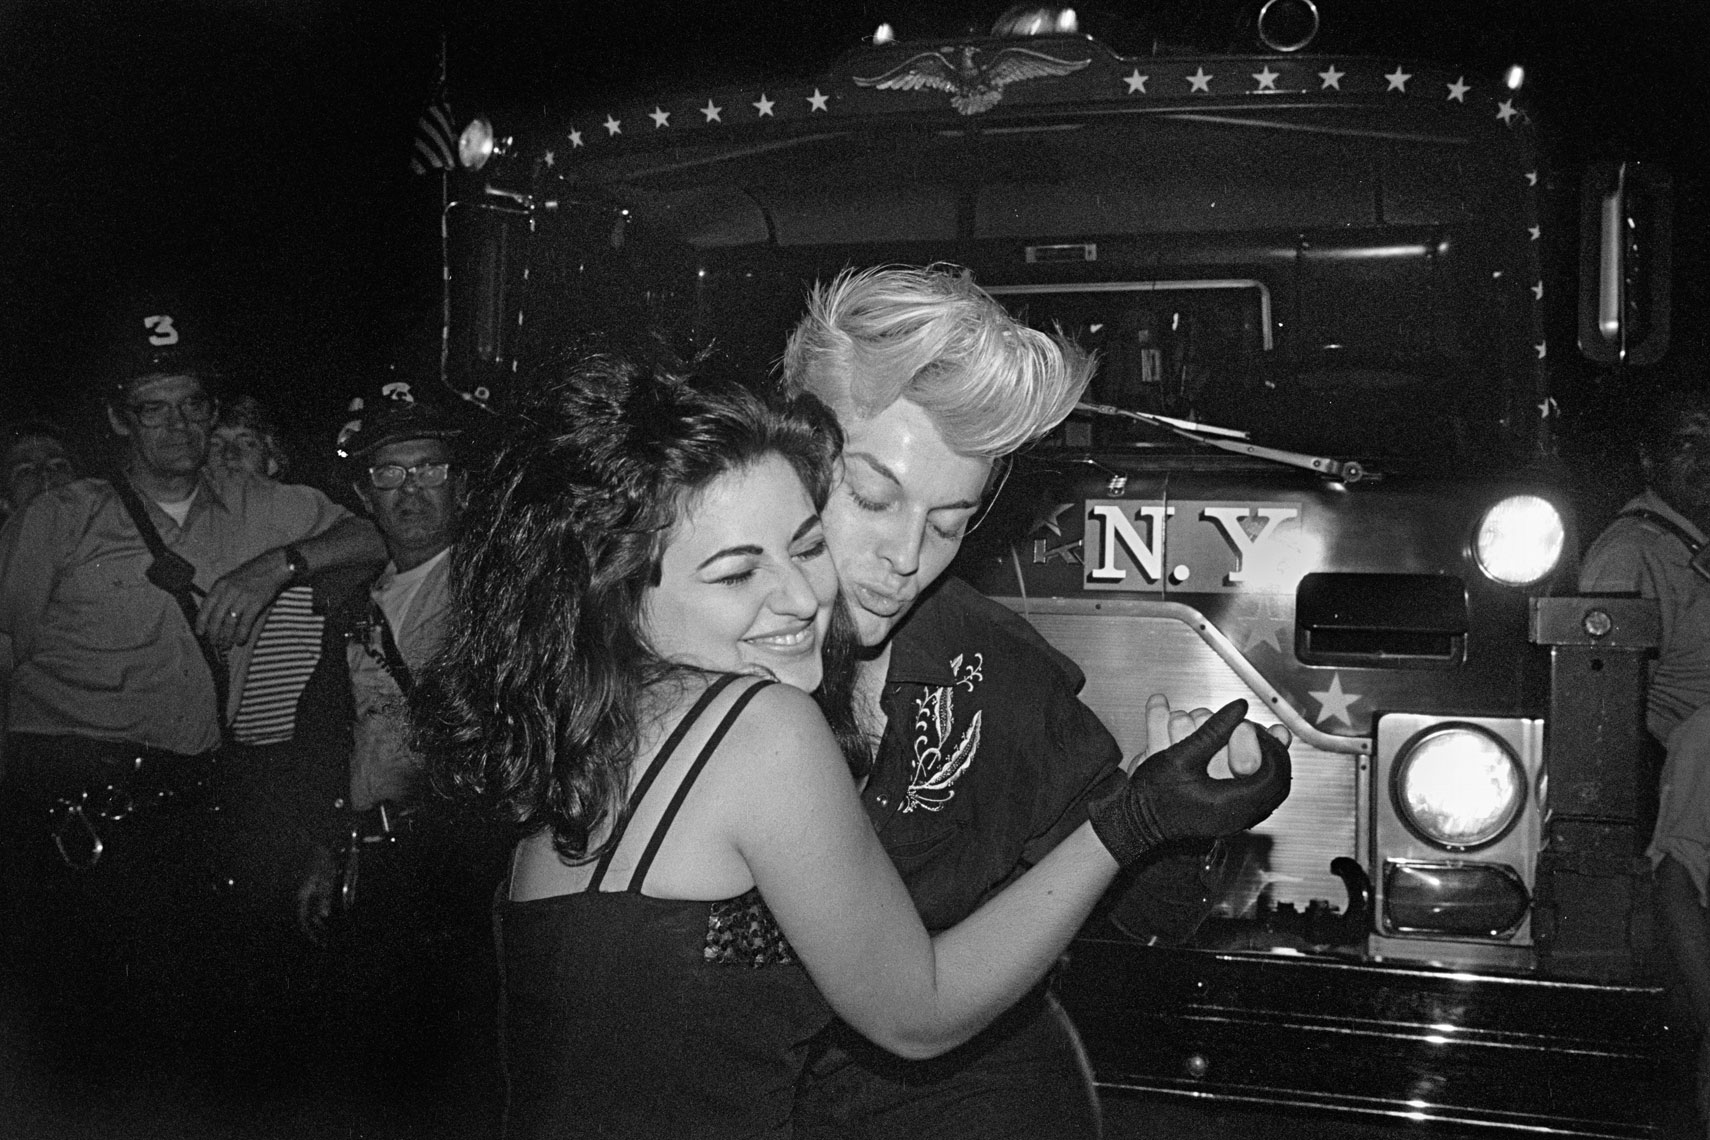 38_Club57_Elvis-Memorial-Party-out-on-street-after-fire-in-Club_John-Sex-and-April-Palmieri_0880.jpg